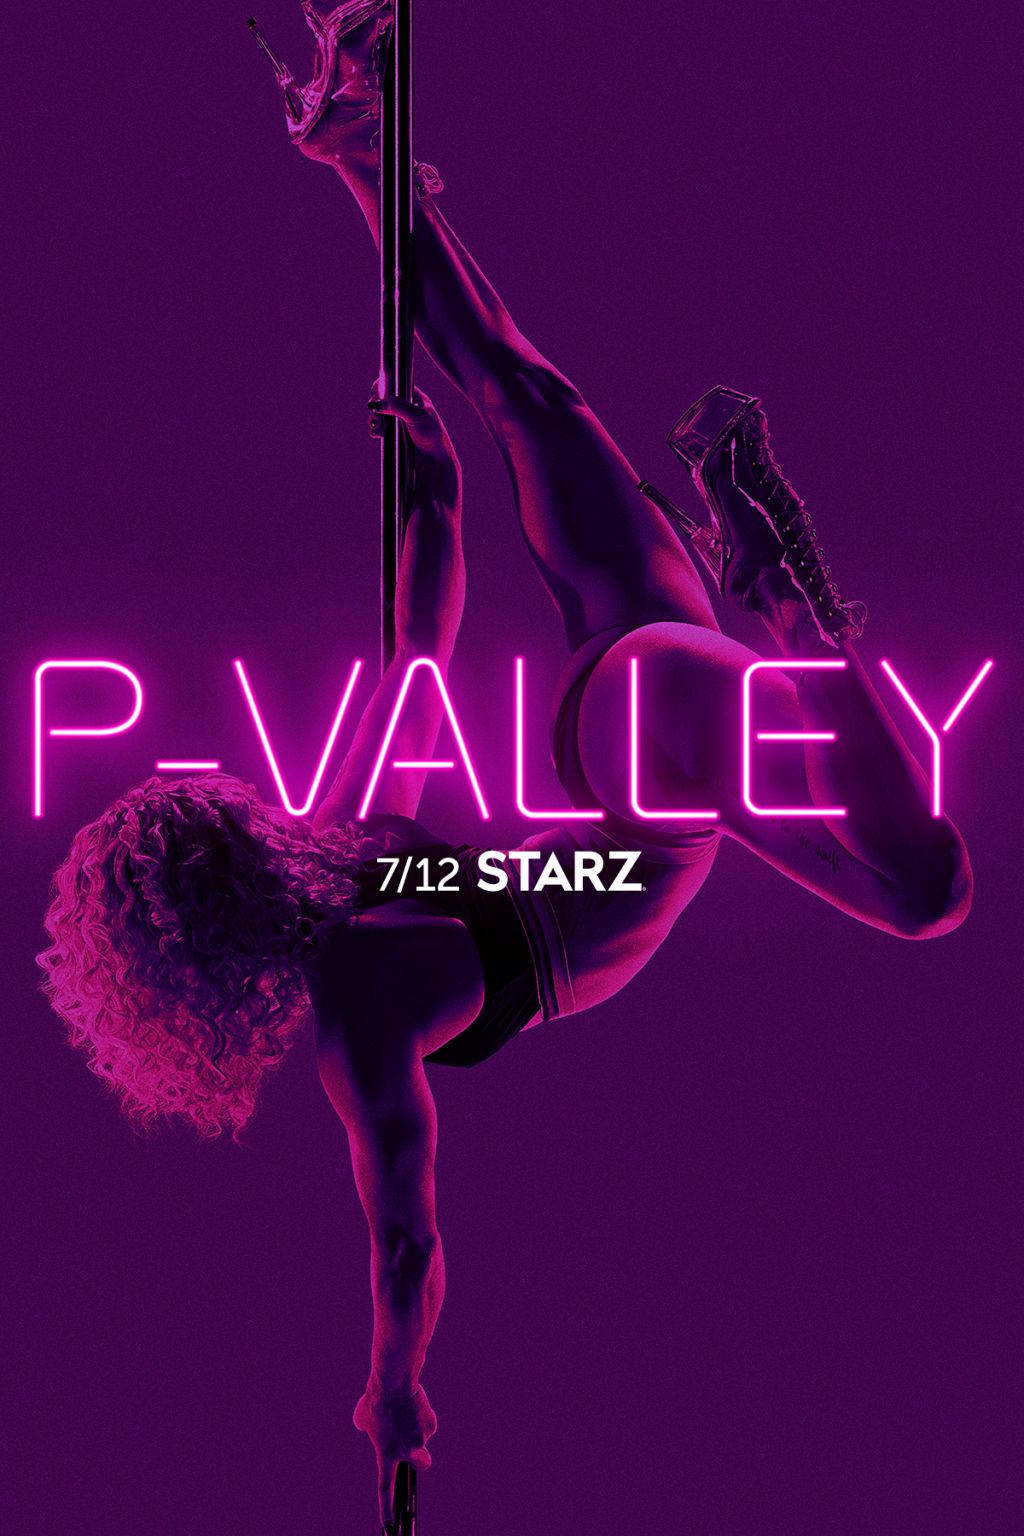 STARZ Reveals Official Trailer And Key Art For New Series "PValley"